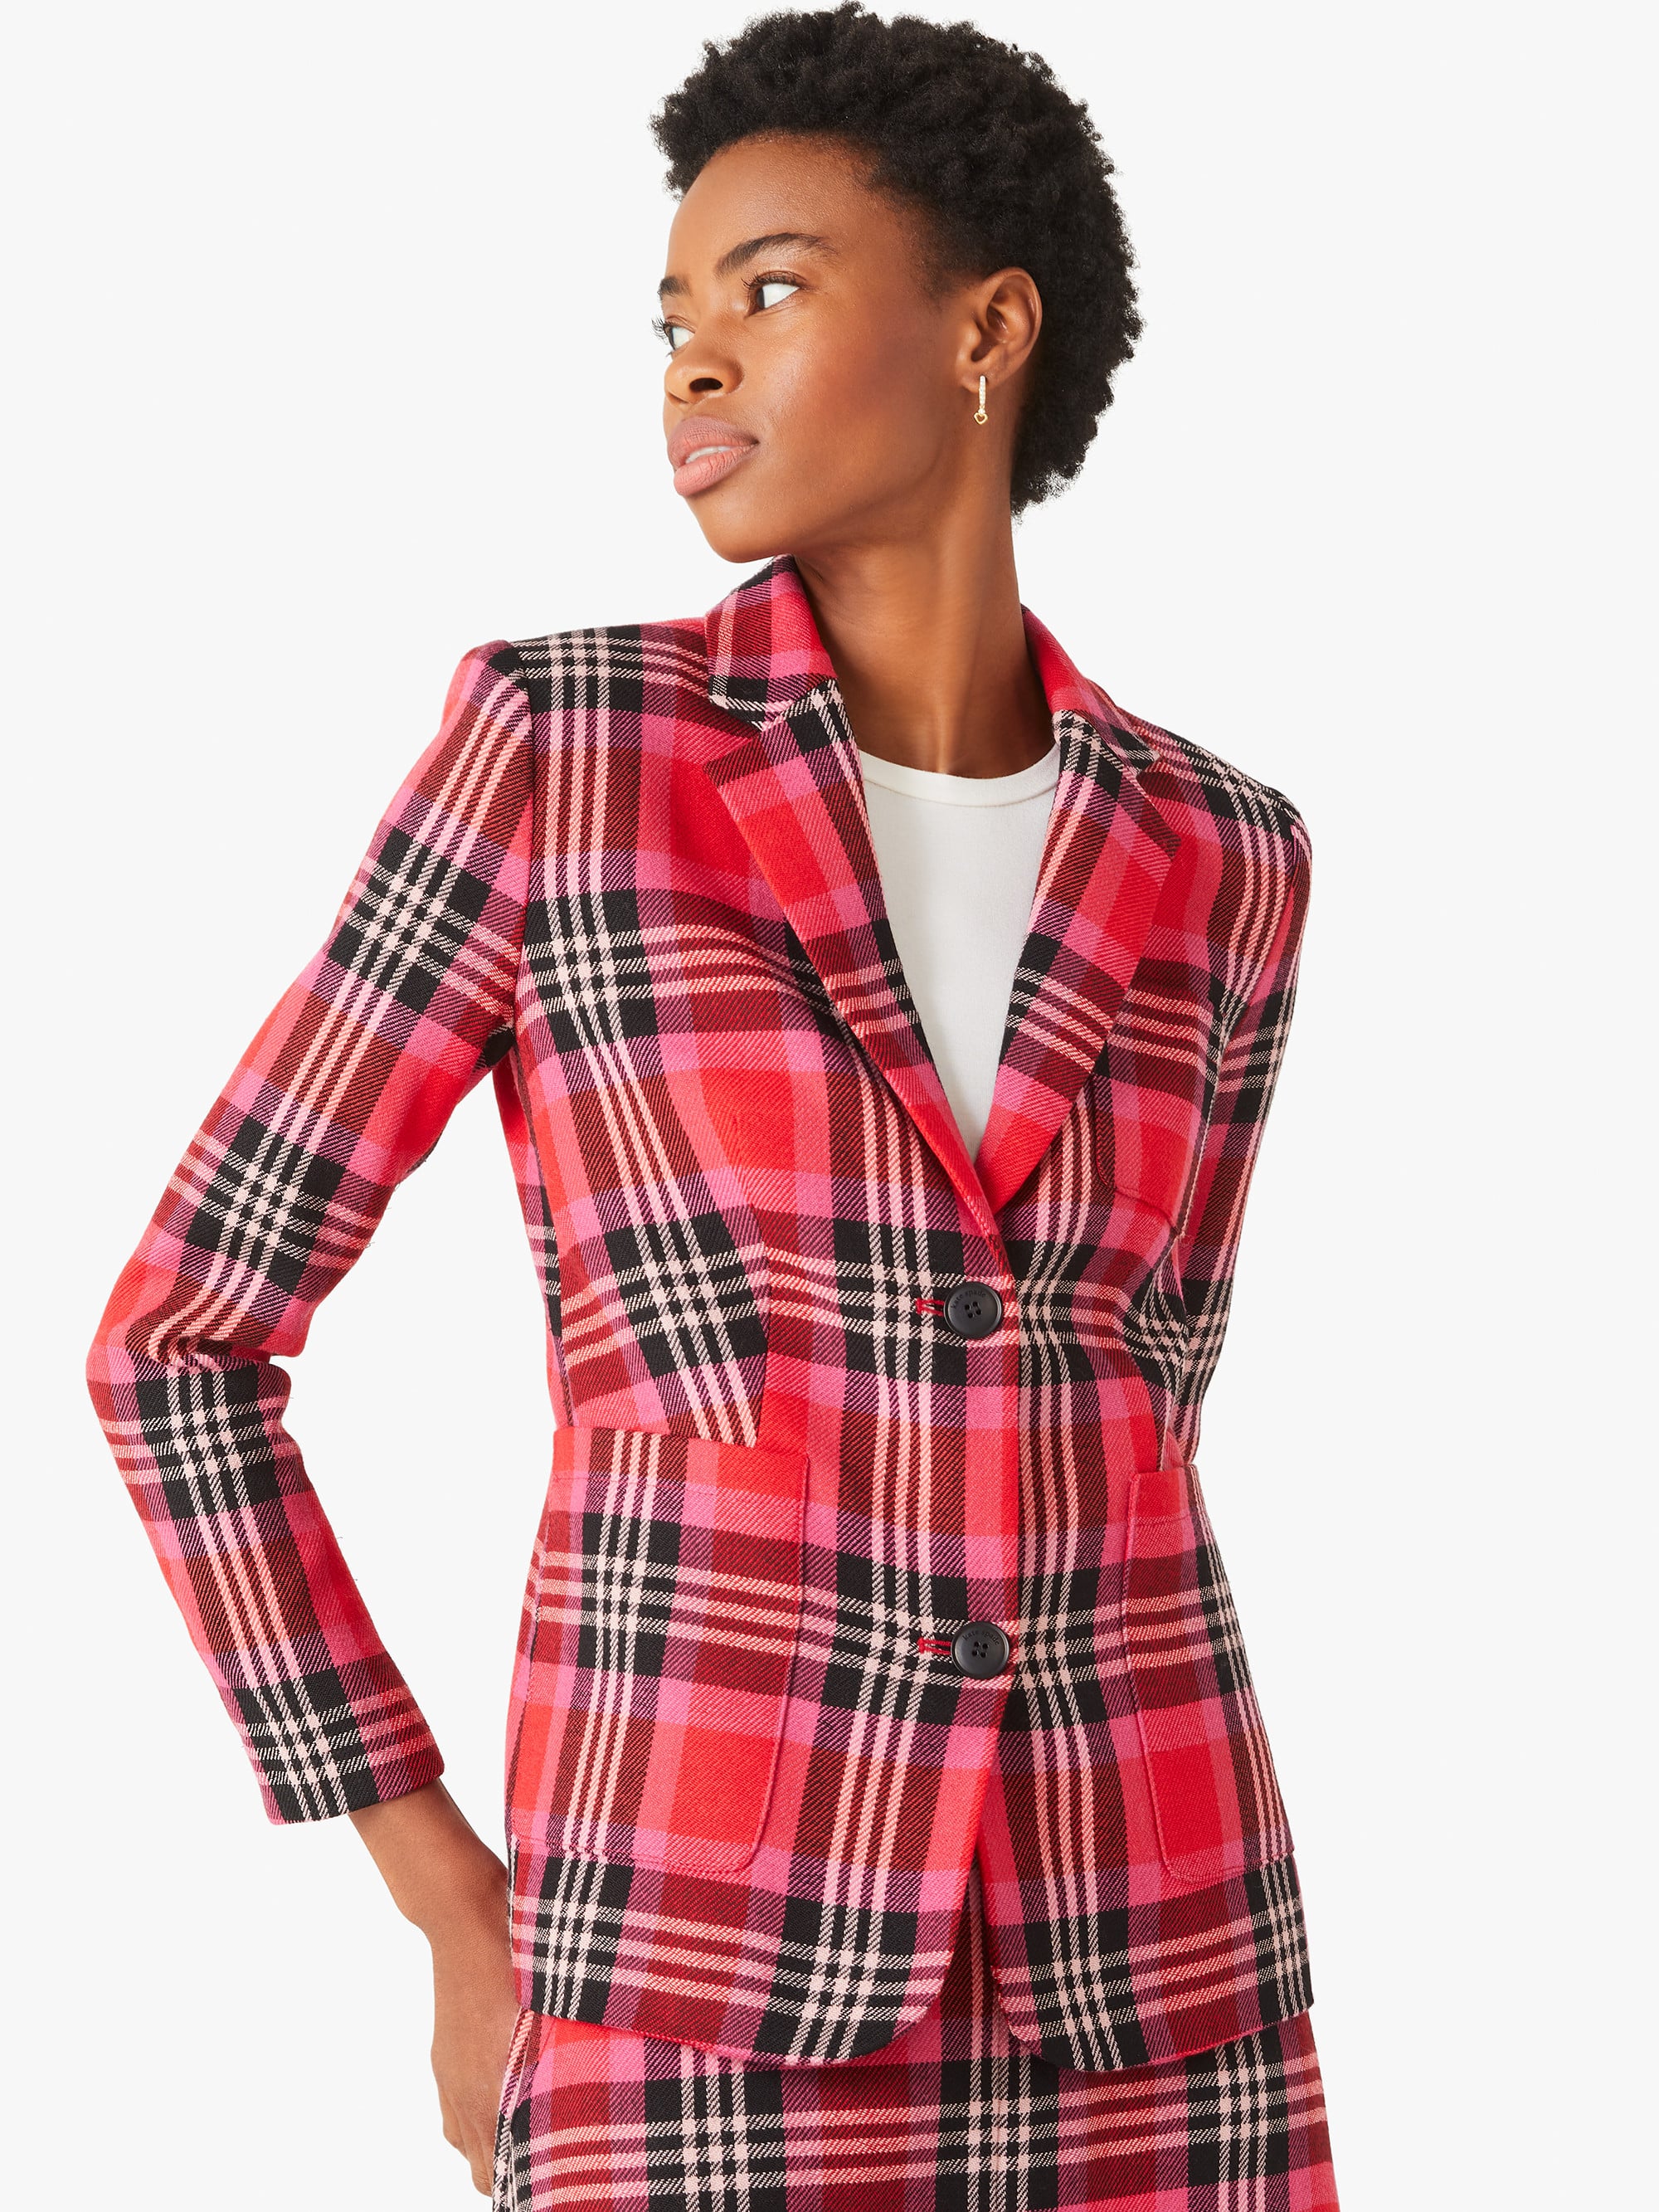 All Suited Up: Foliage Plaid Blazer | Plaid and Leopard Print Galore! Kate  Spade NY Just Released a Gorgeous New Fall Collection | POPSUGAR Fashion  Photo 27